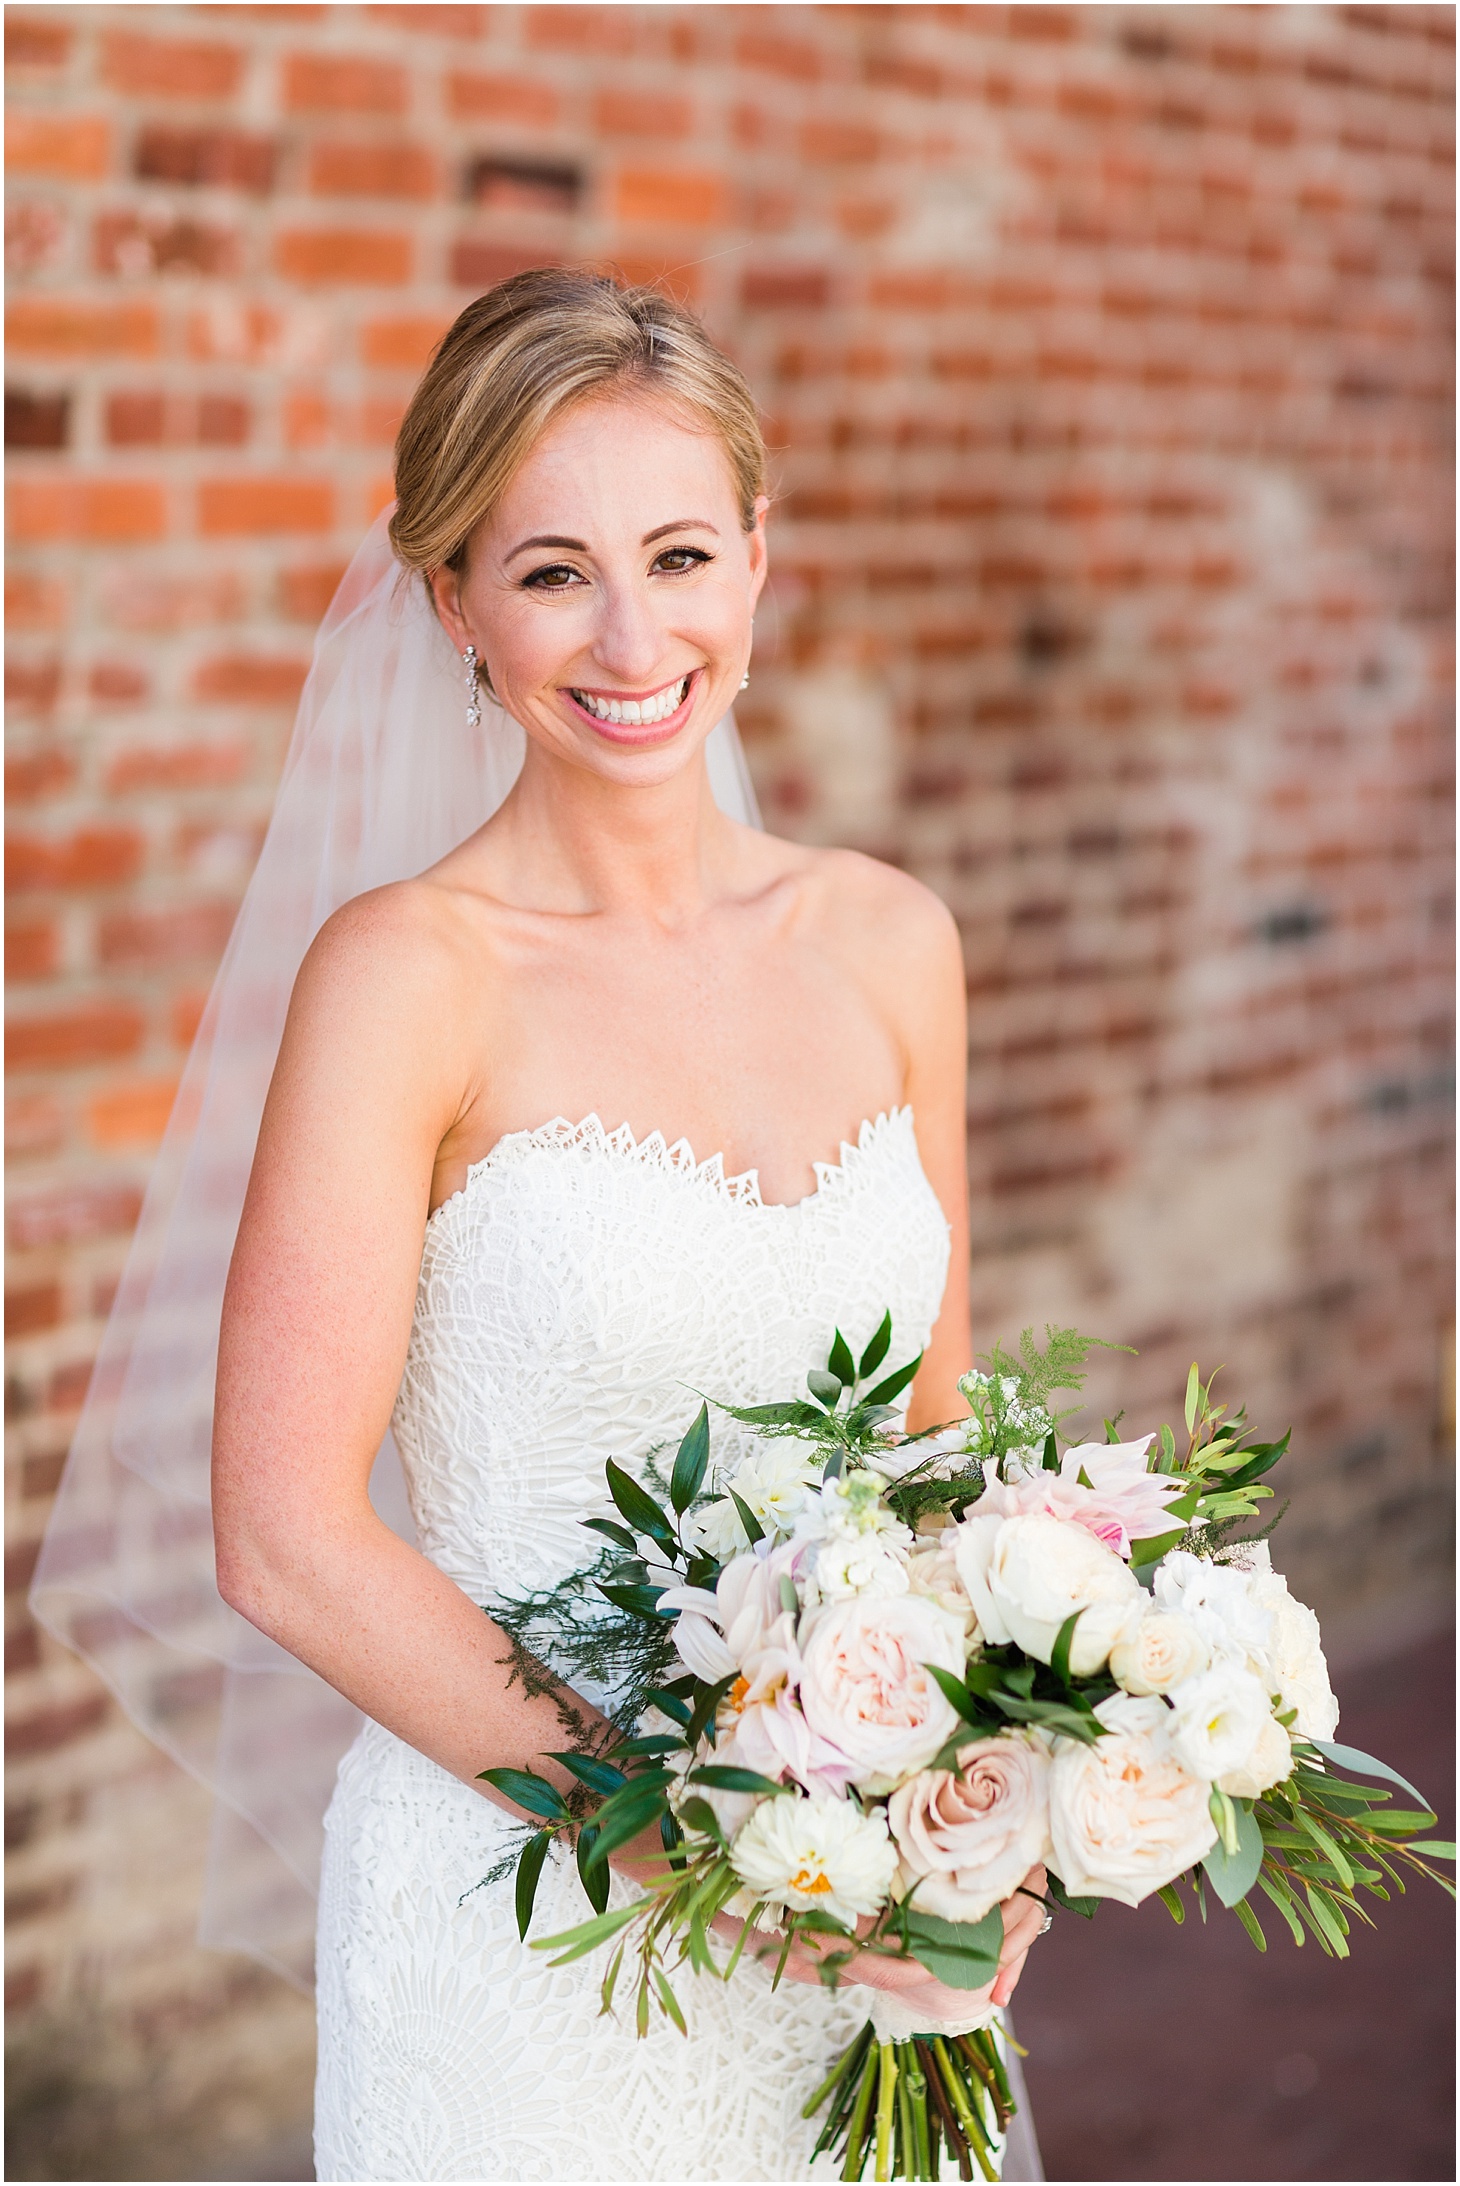 Bridal Portraits at Long View Gallery, Industrial-Chic Wedding in DC, Sarah Bradshaw Photography, DC Wedding Photographer